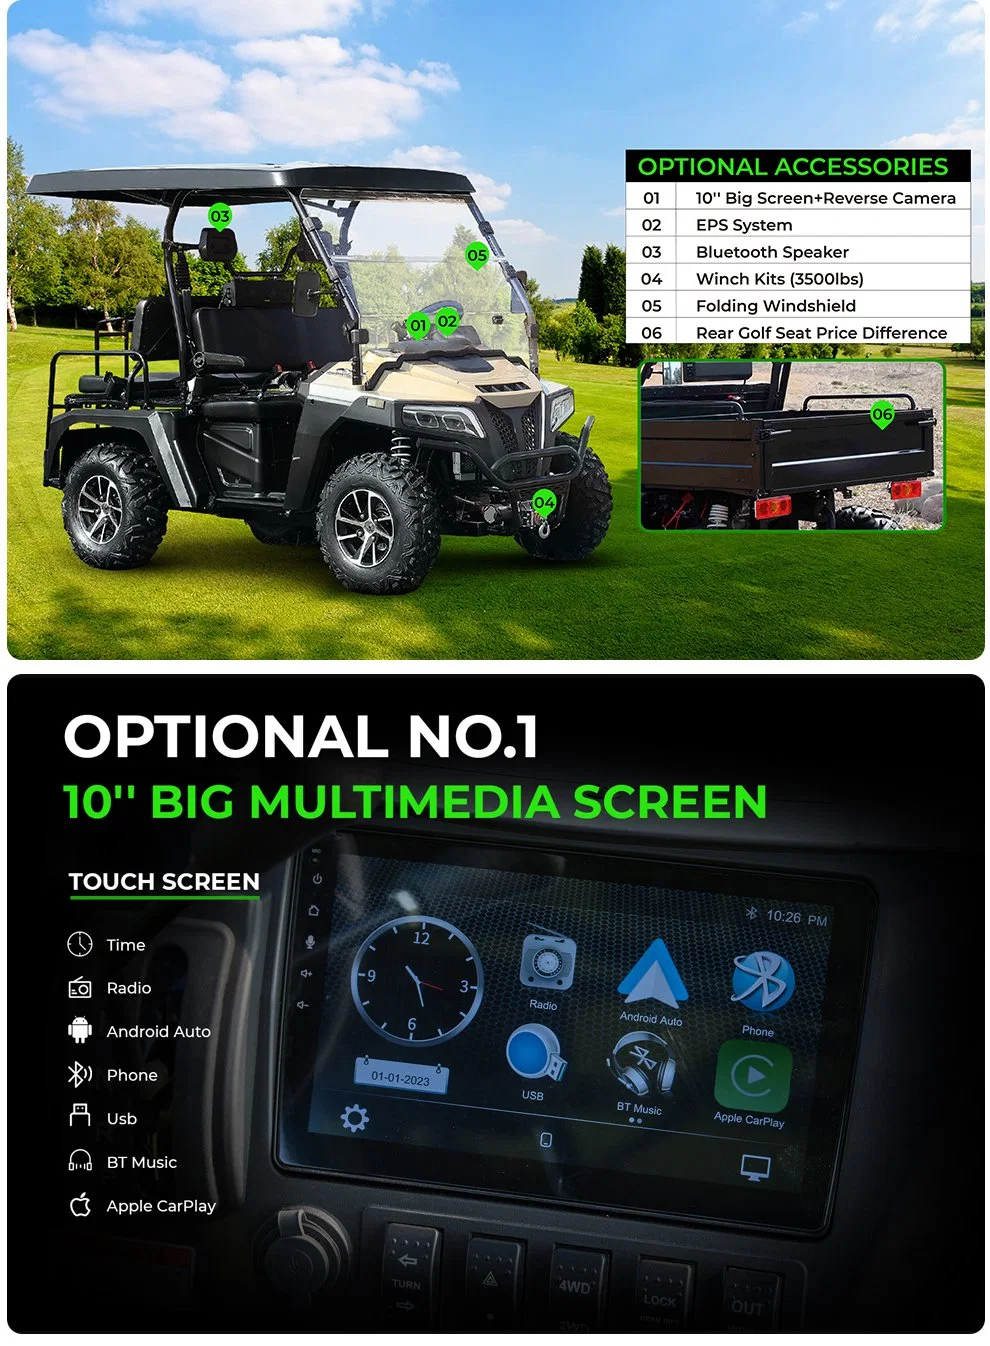 2024 10KW Hunting Club Buggy 4 Seater Vehicles Electric Golf Car